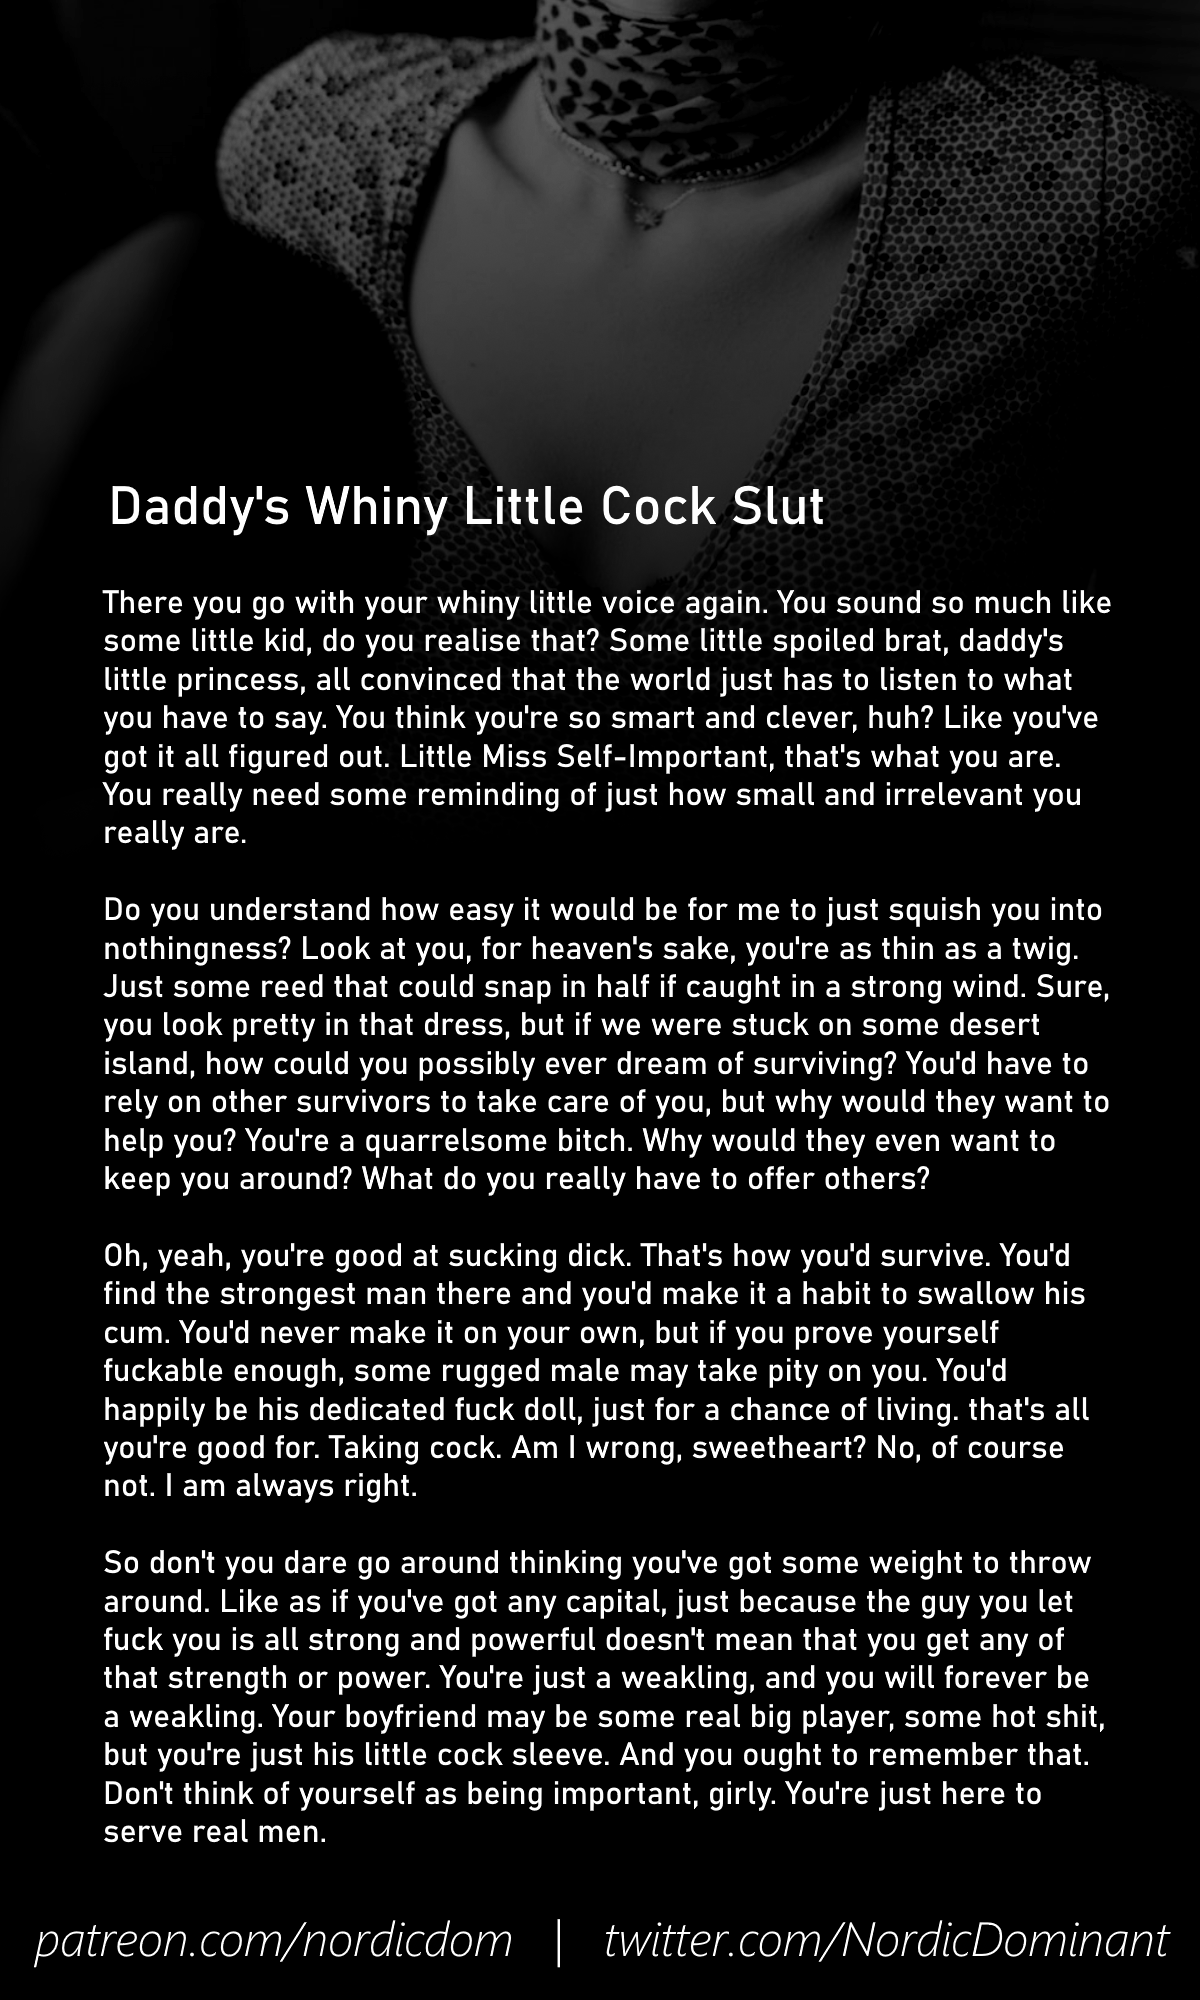 Nordic Dom On Twitter Miniblog Daddys Whiny Little Cock Slut